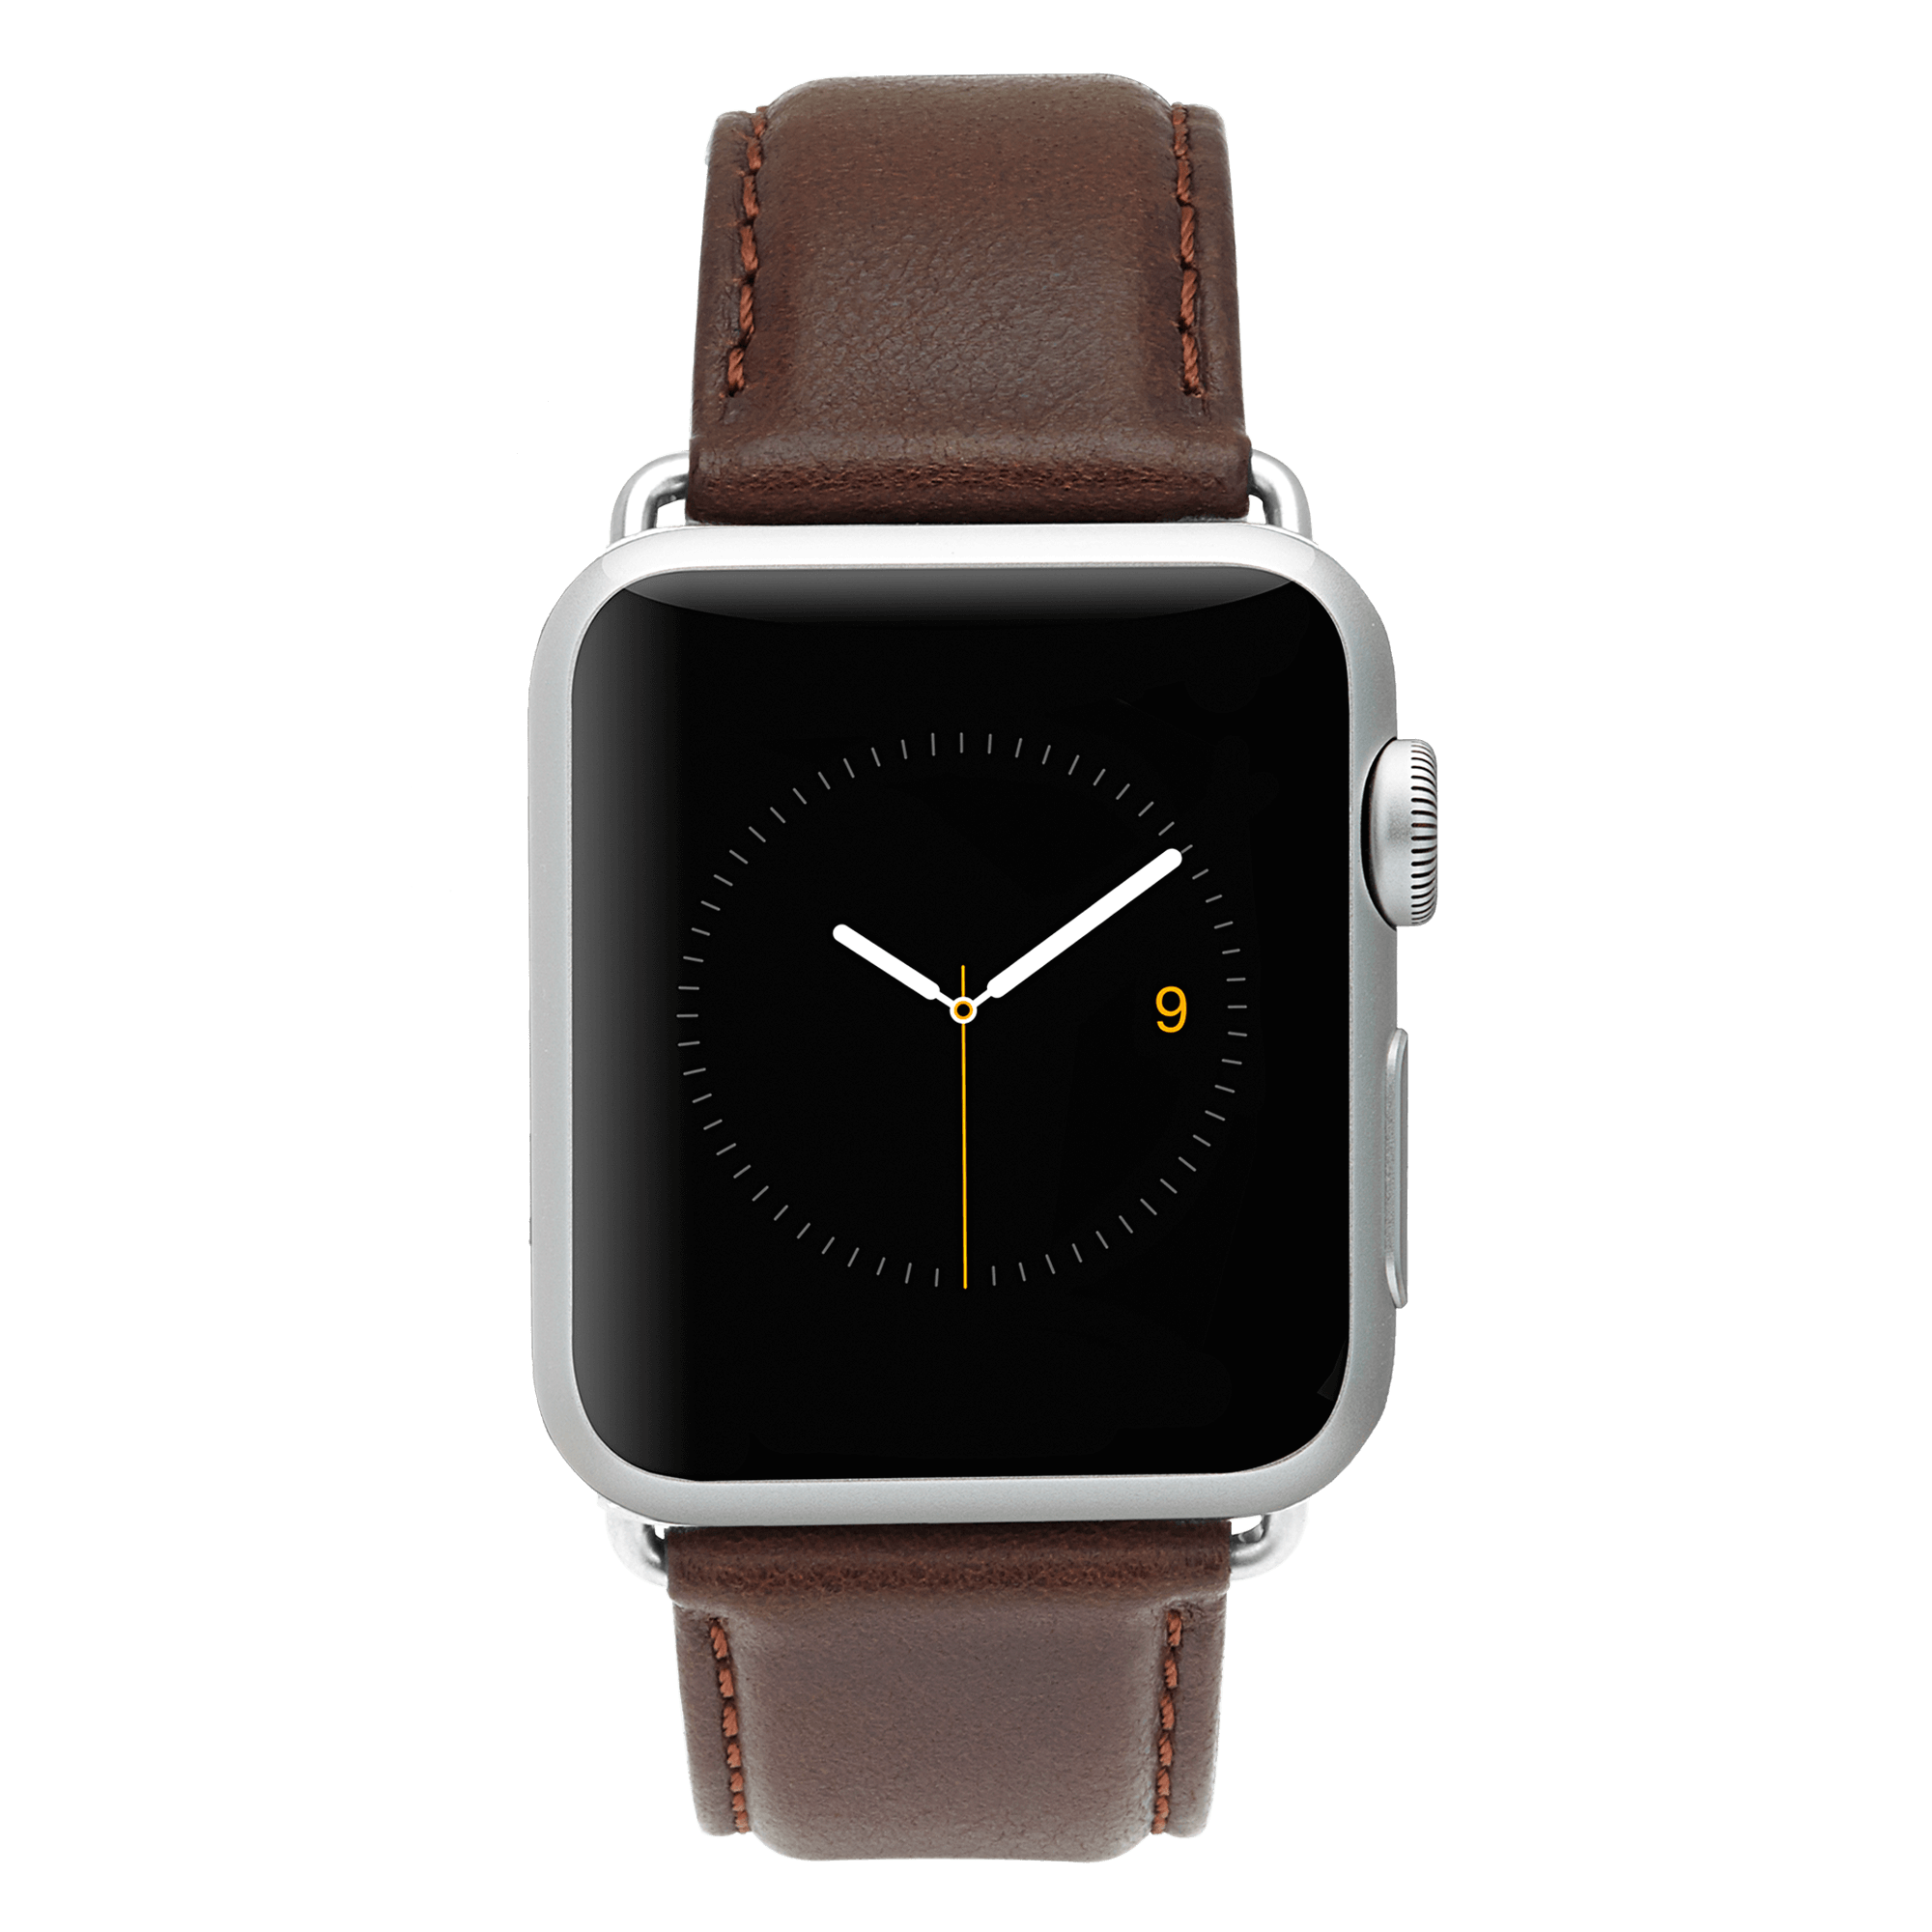 Apple Watch Bands 44mm: Linked, Leather, Nylon | Case-Mate